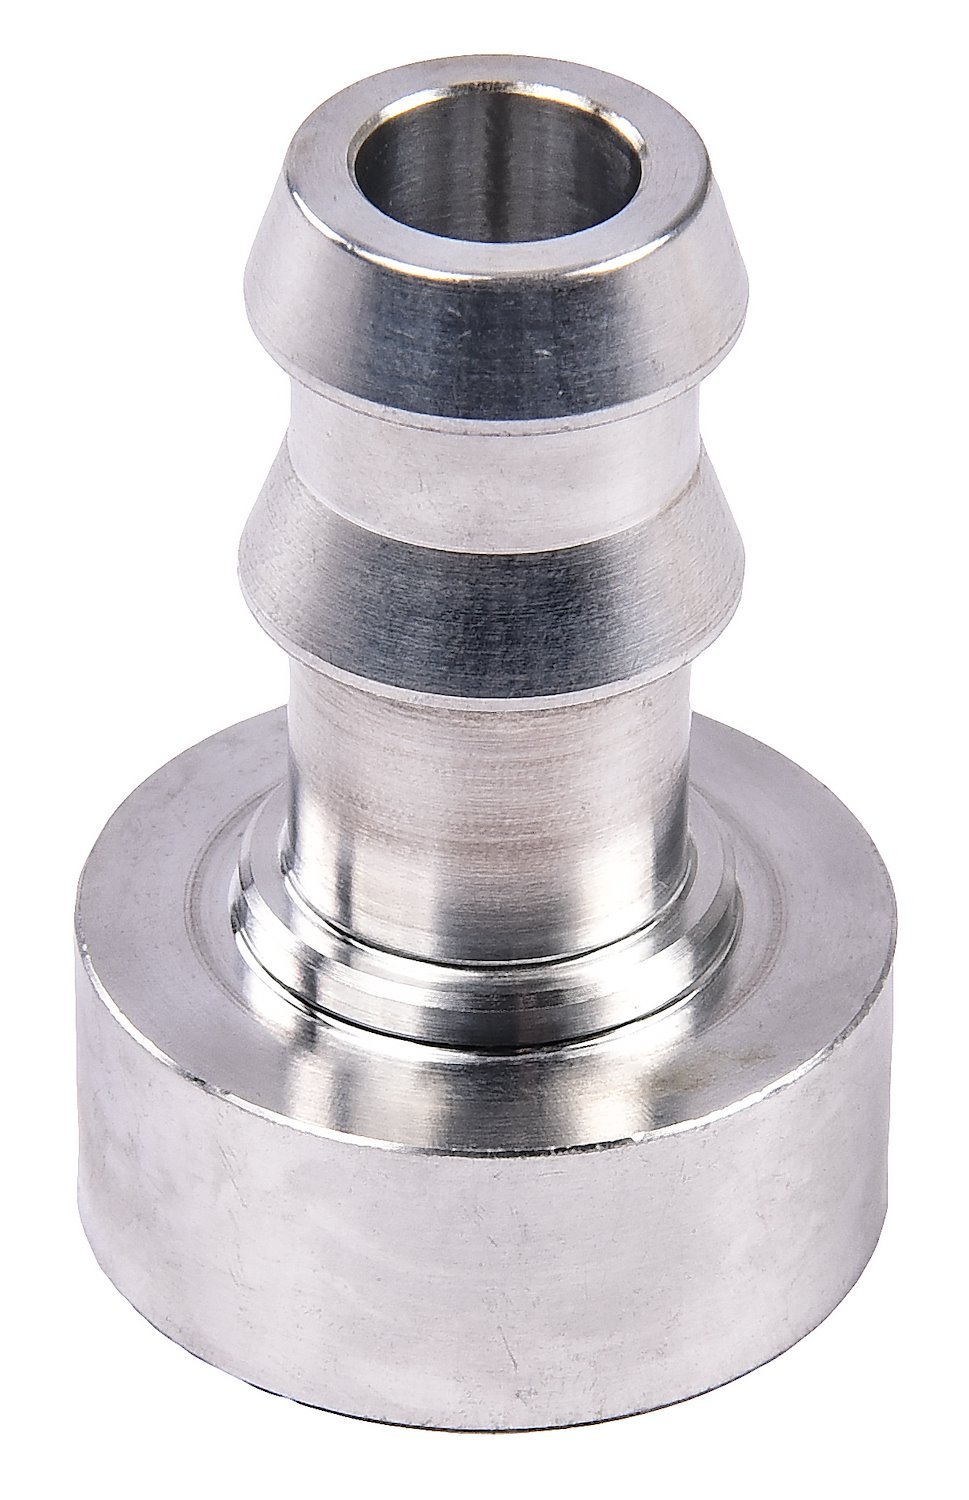 Weld-On Hose Barb Fitting with 1/2 in. Hose Barb [Aluminum]